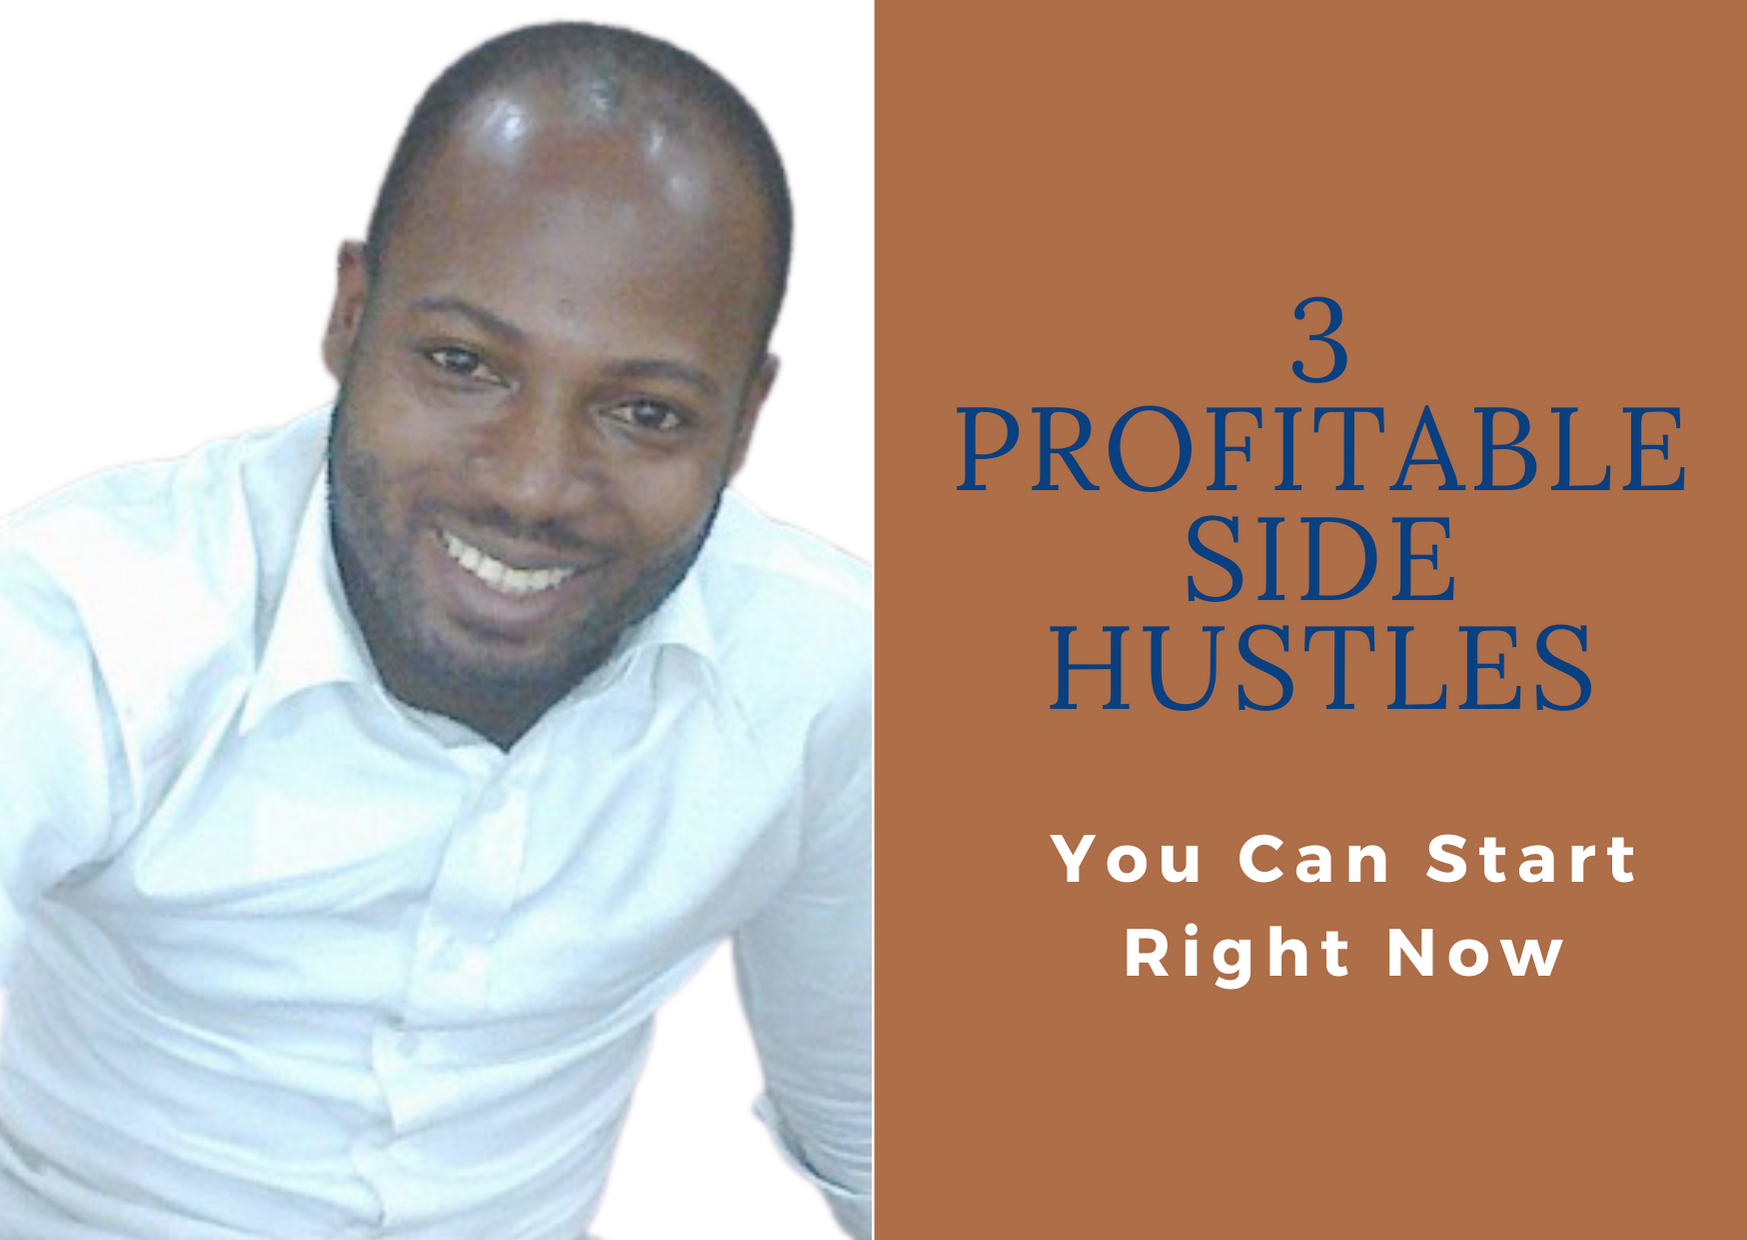 3 Profitable Side Hustles You Can Start Right Now